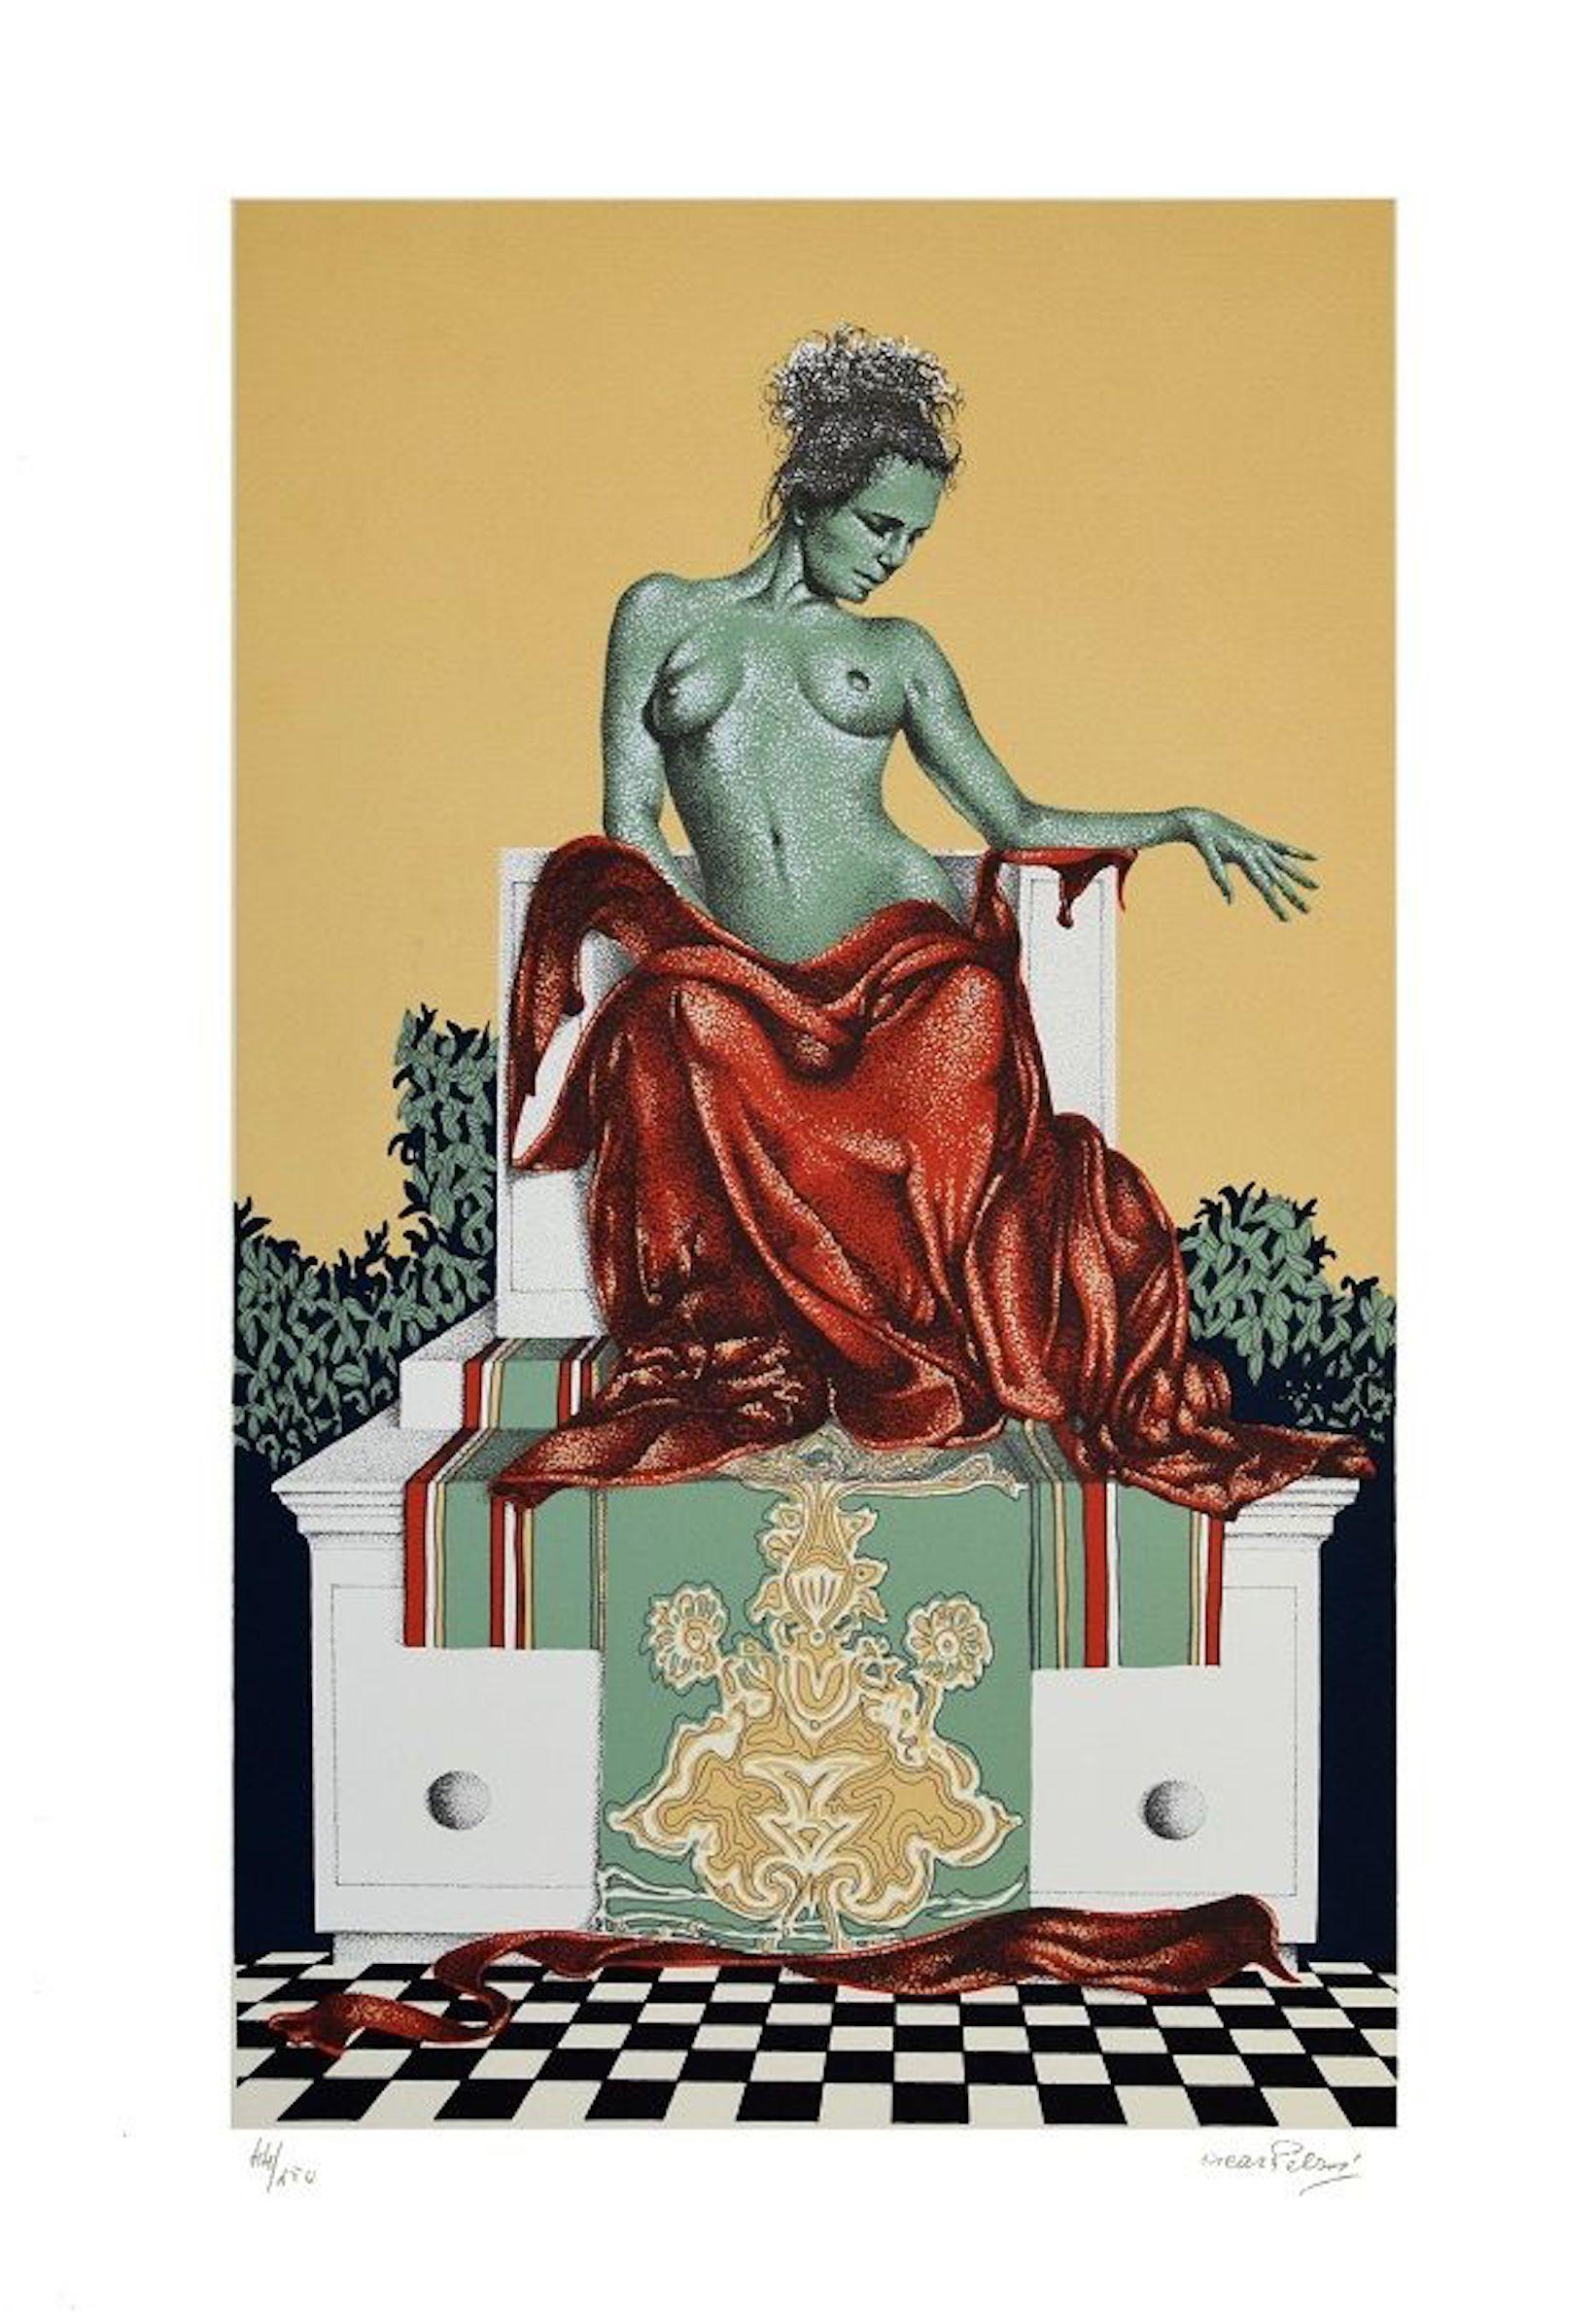 The Diva is an original colored serigraph realized by Oscar Pelosi during the 1980s.

The artwork is hand-signed in pencil by the artist on the lower right. Numbered on the lower left. Edition of 44/150.

Good conditions.

Oscar Pelosi (1938 – 1996)